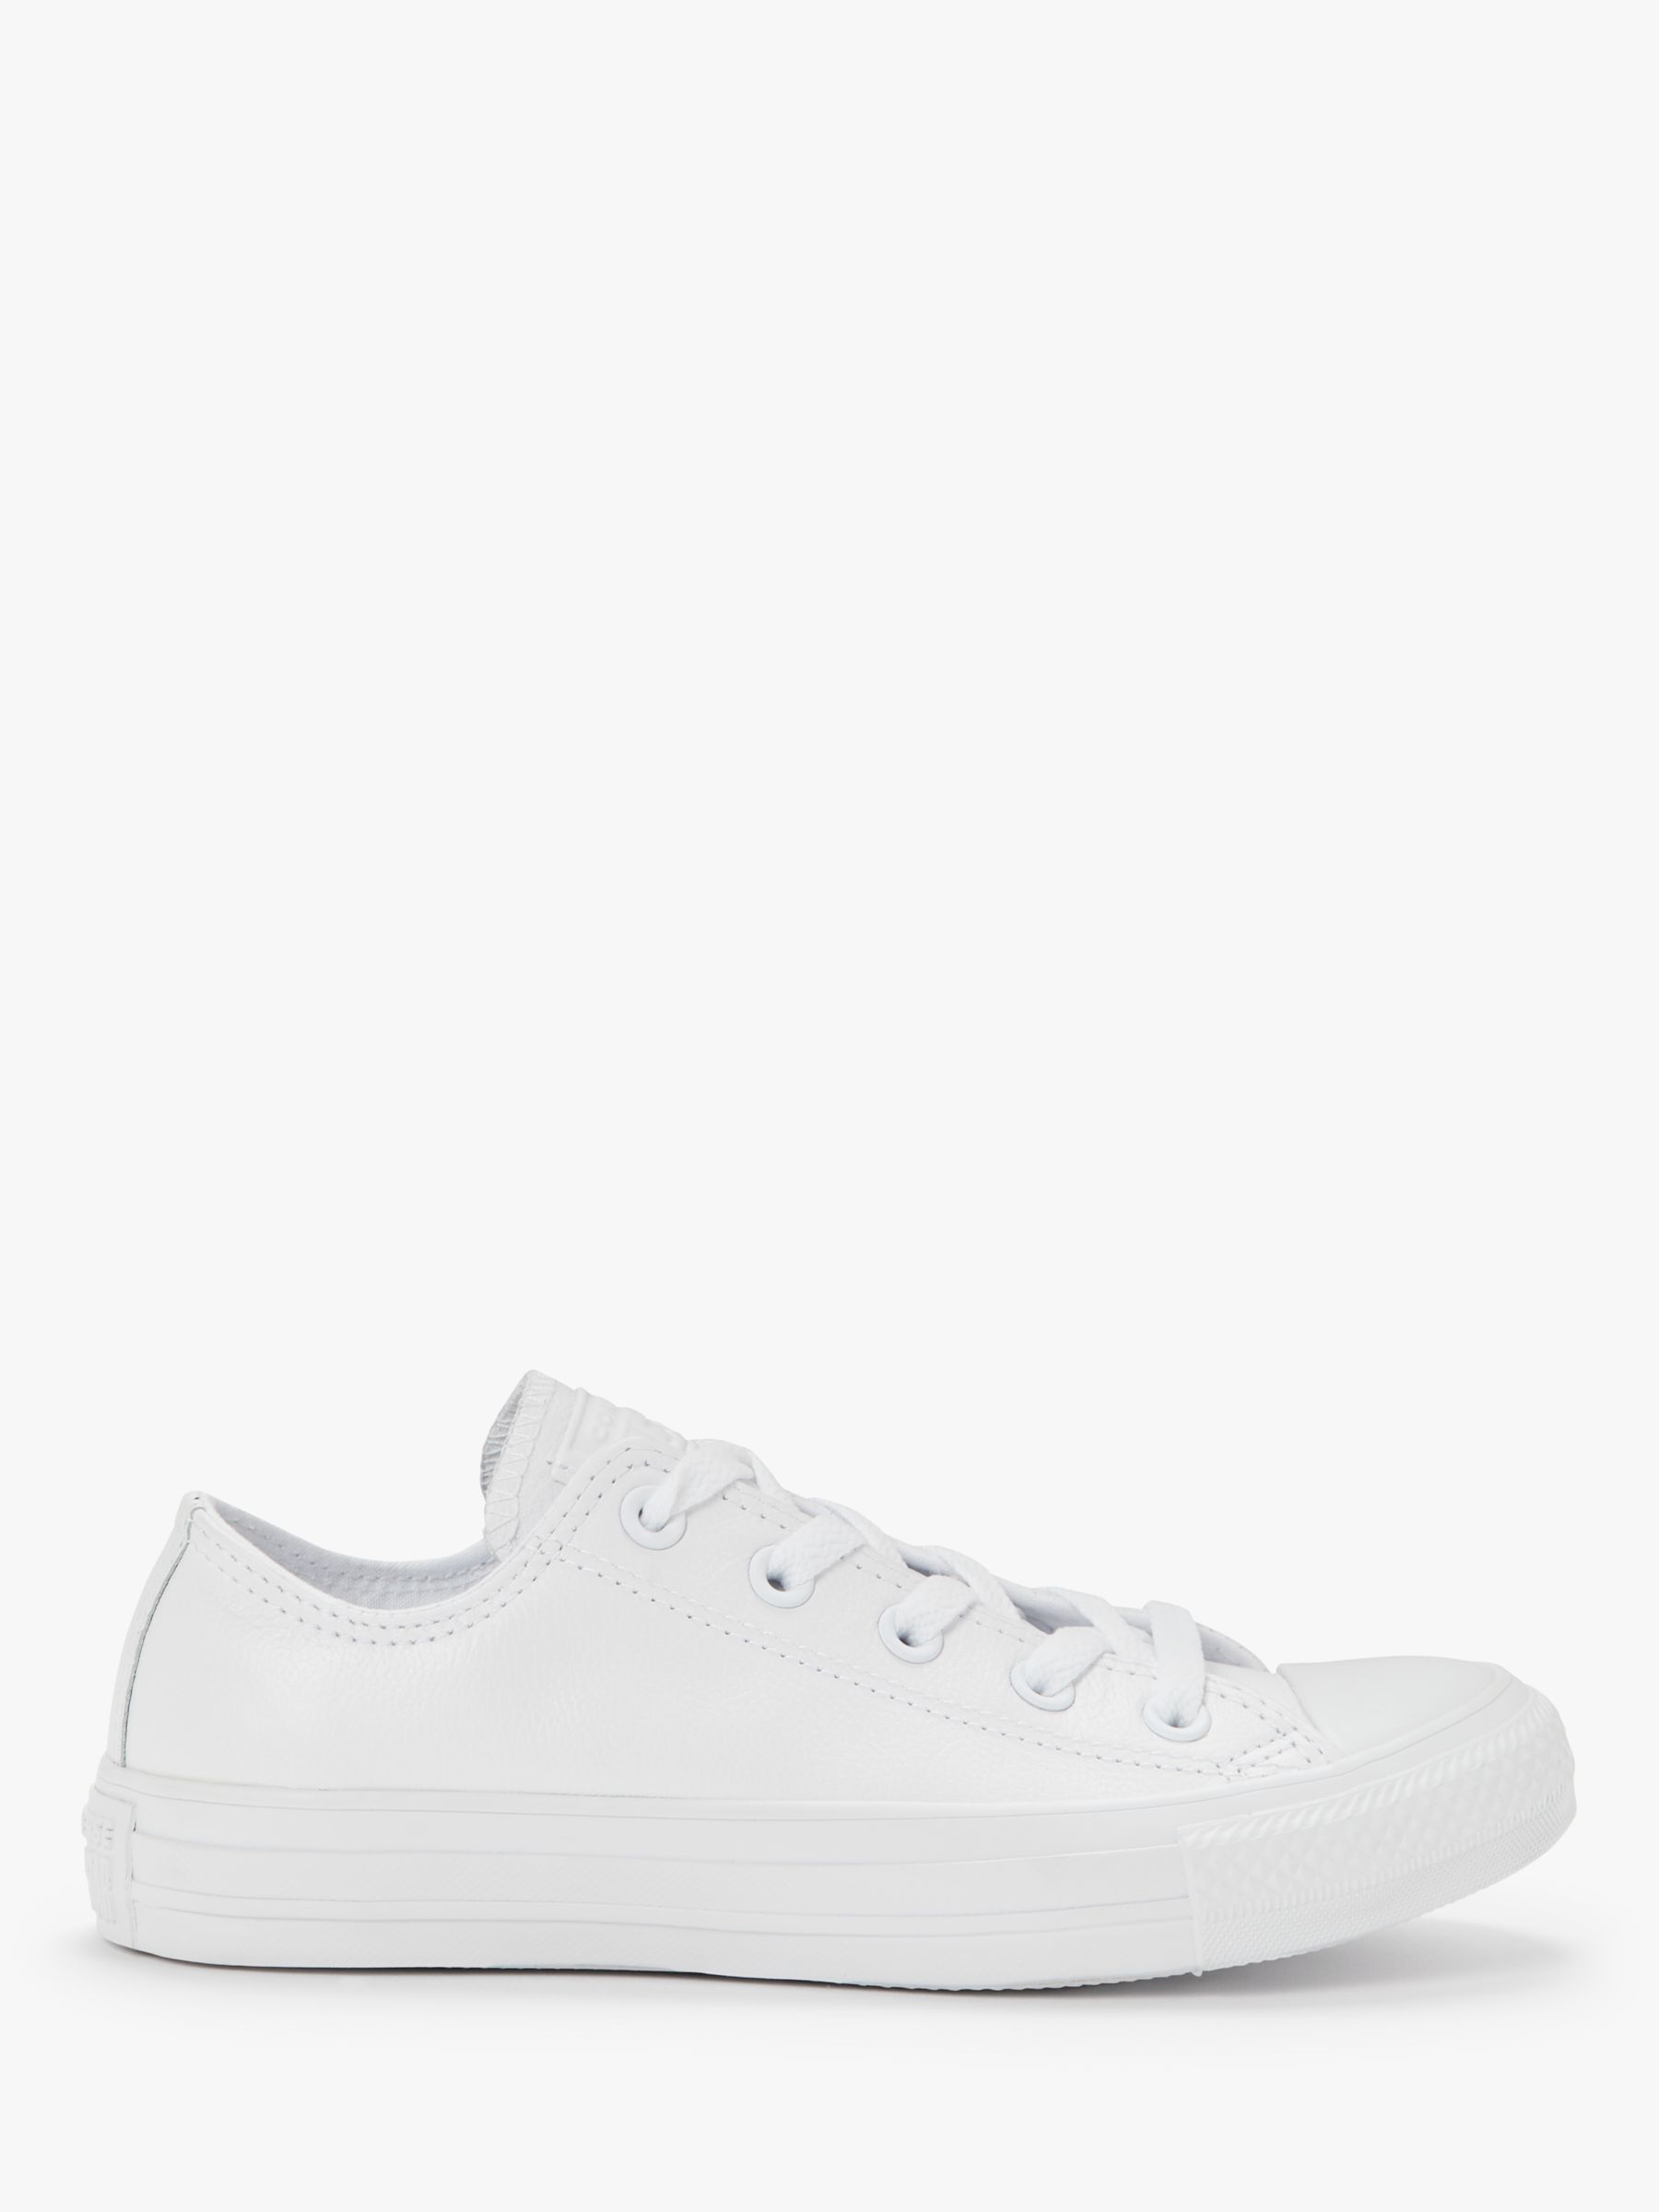 converse sneakers white leather